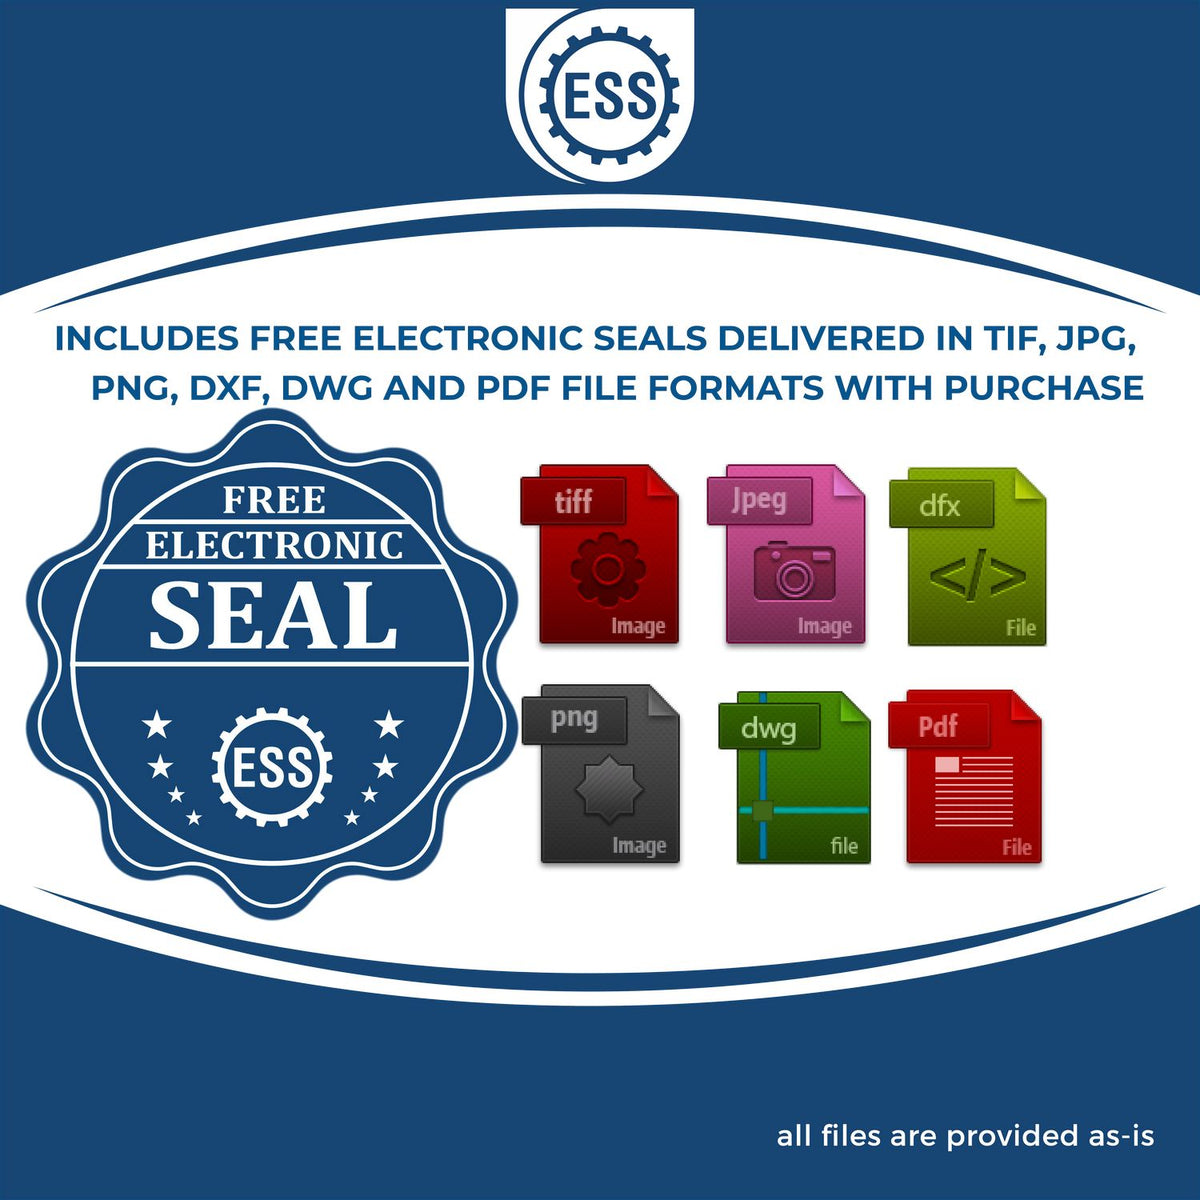 An infographic for the free electronic seal for the MaxLight Premium Pre-Inked Indiana Rectangular Notarial Stamp illustrating the different file type icons such as DXF, DWG, TIF, JPG and PNG.